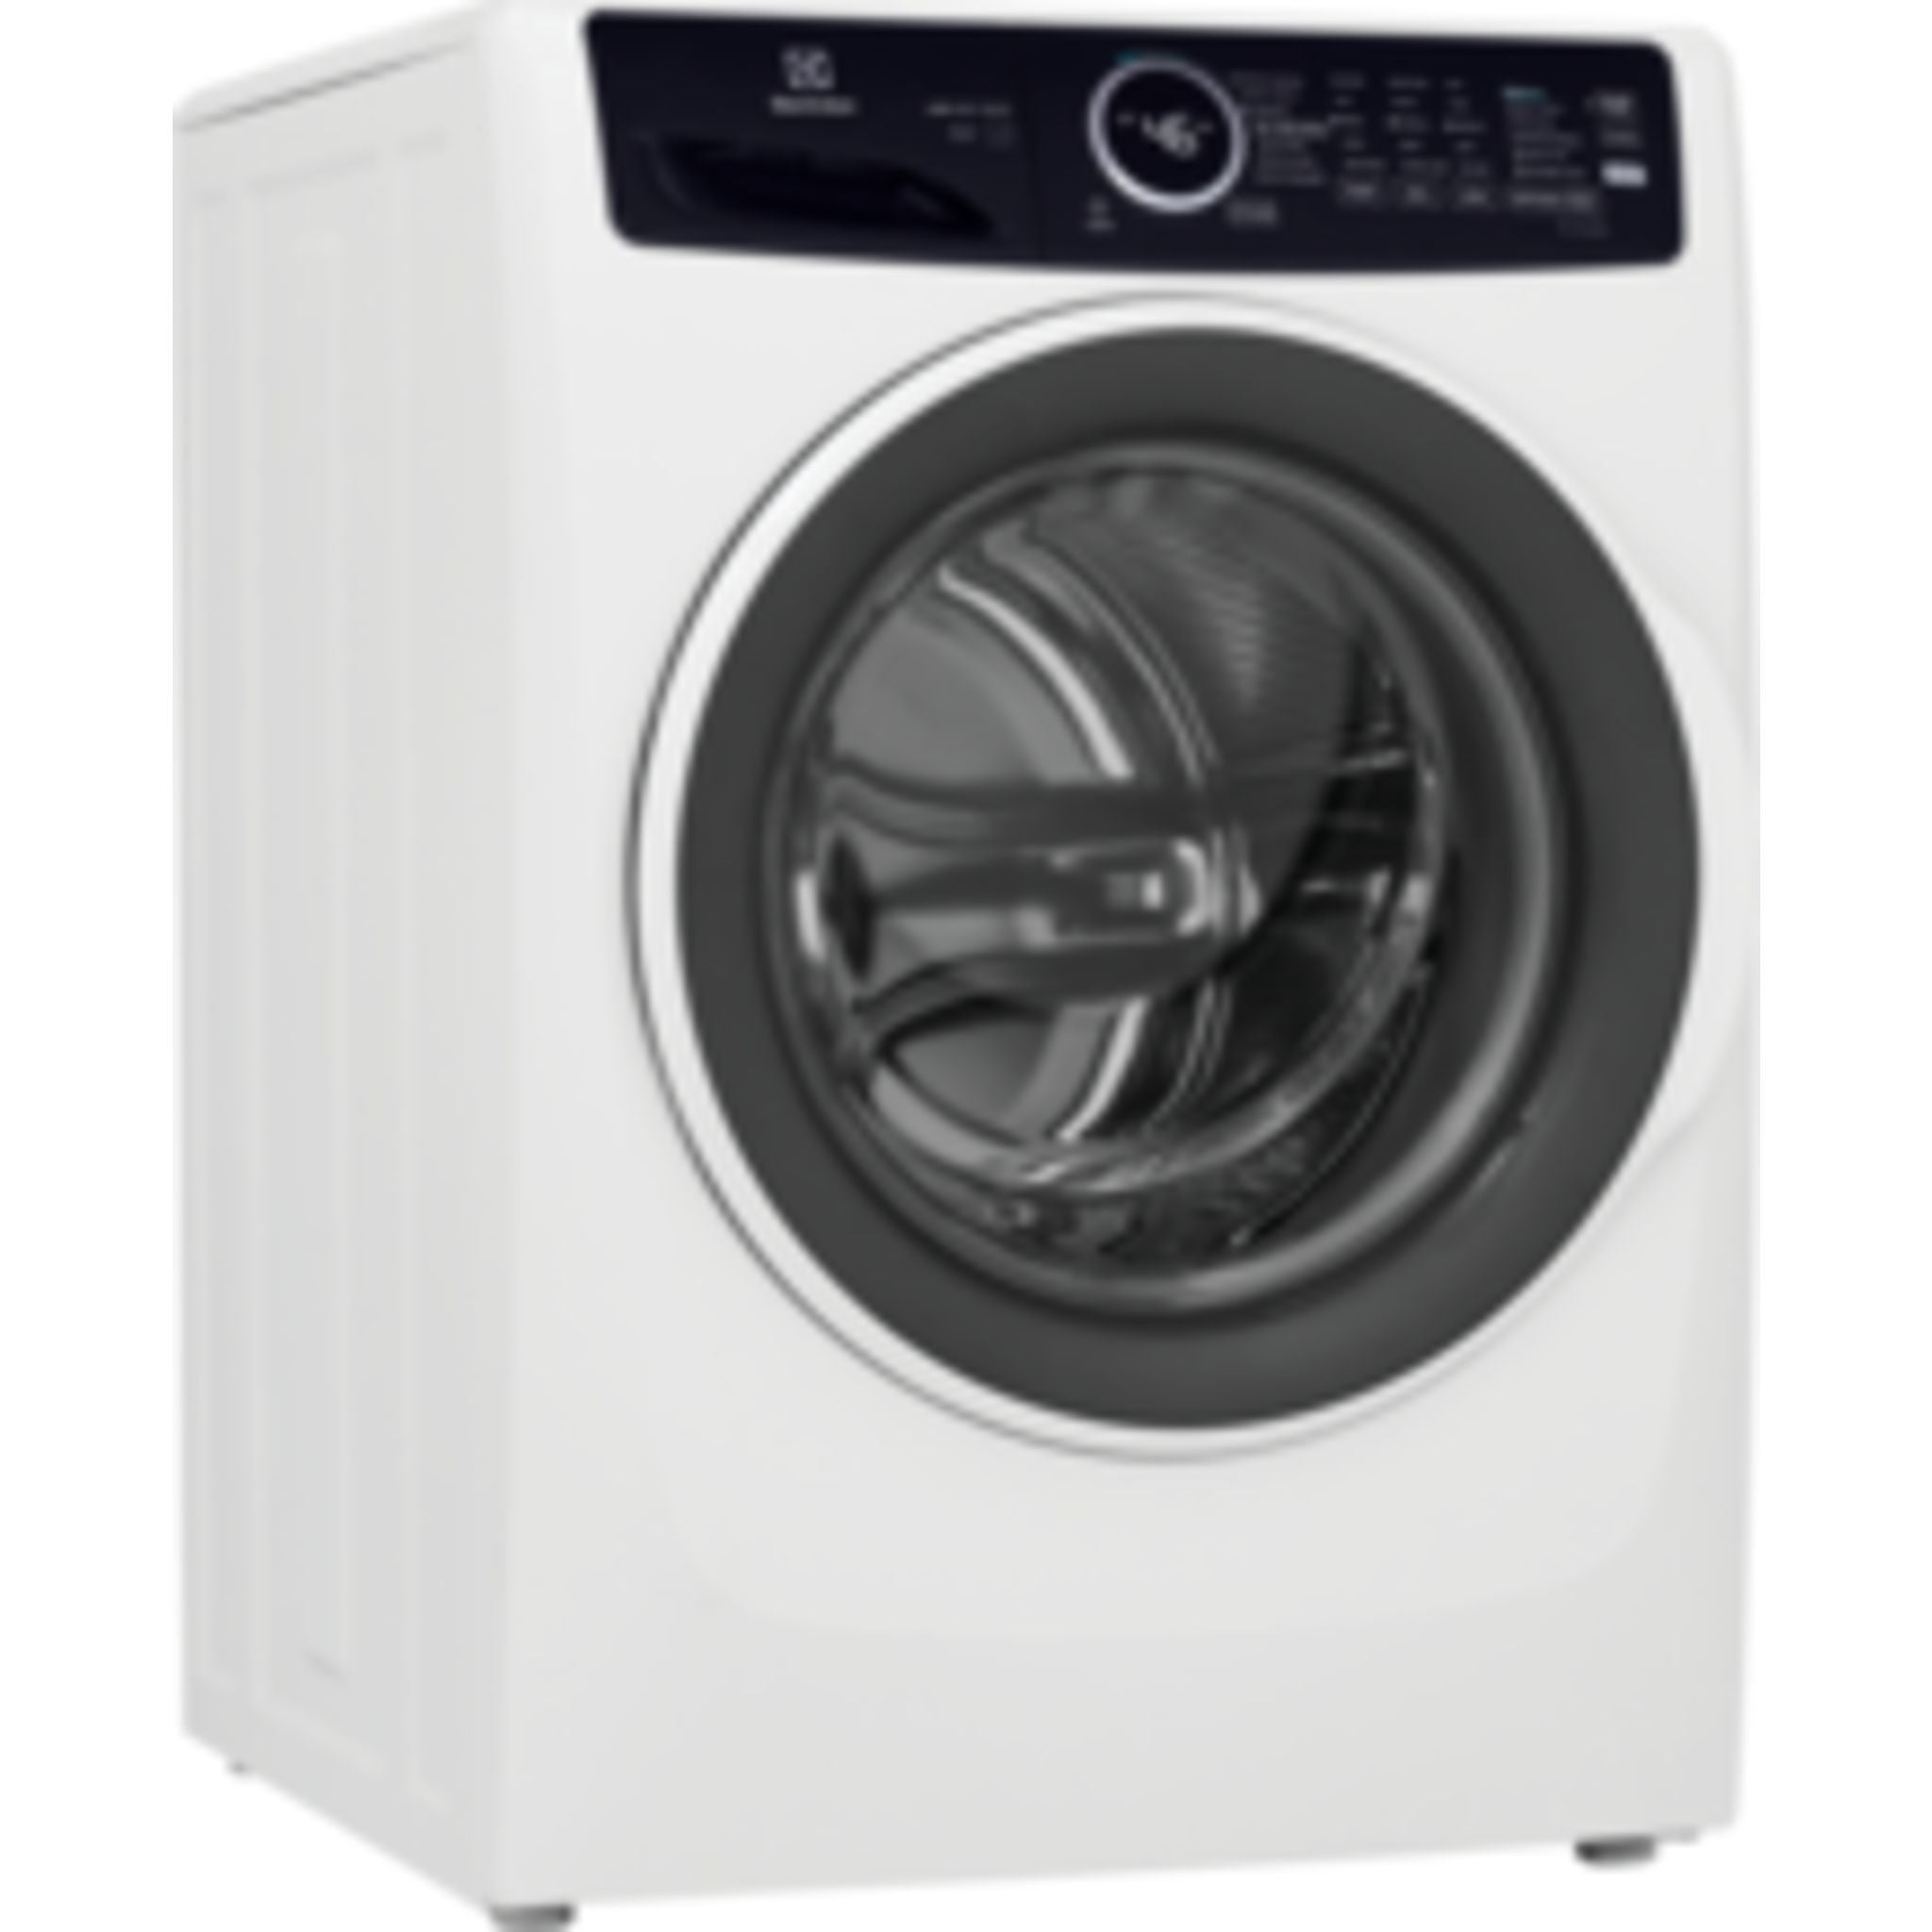 Electrolux Home Products, Electrolux Front Load Washer (ELFW7437AW) - White